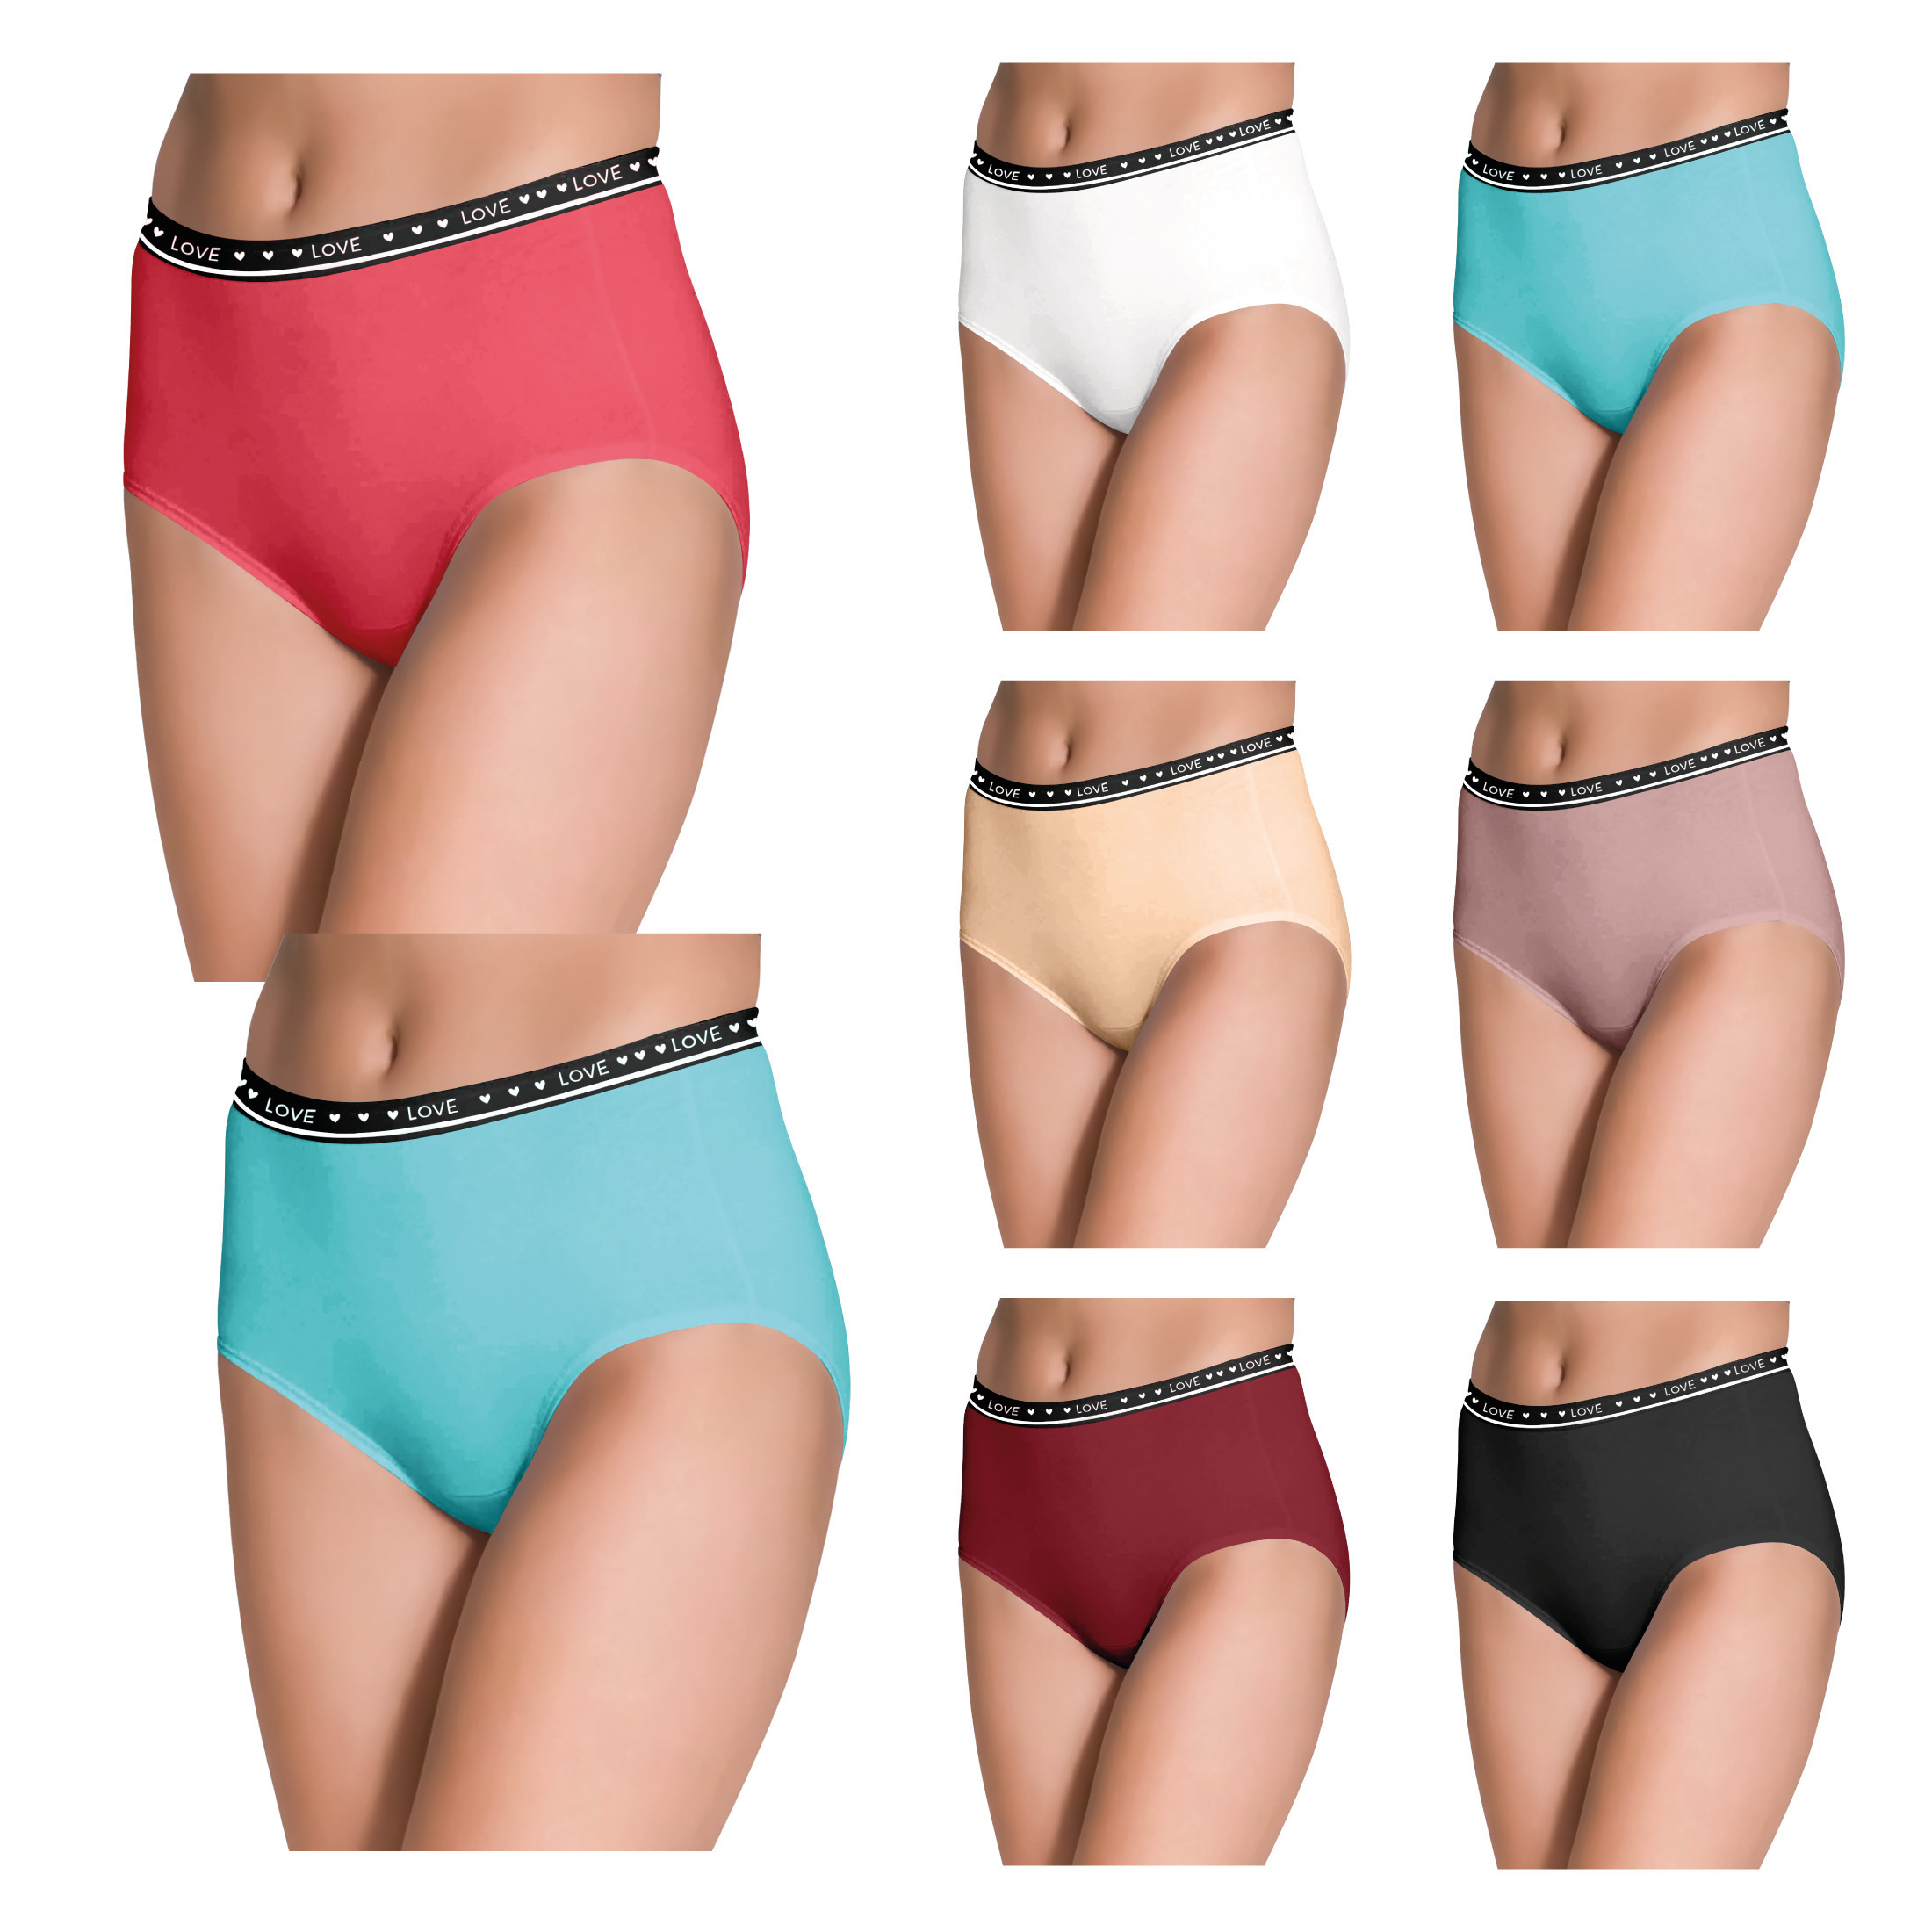 6-Pack: Women's Ultra Soft Moisture Wicking Panties Cotton Perfect Fit Underwear (Plus Sizes Available ) - Large